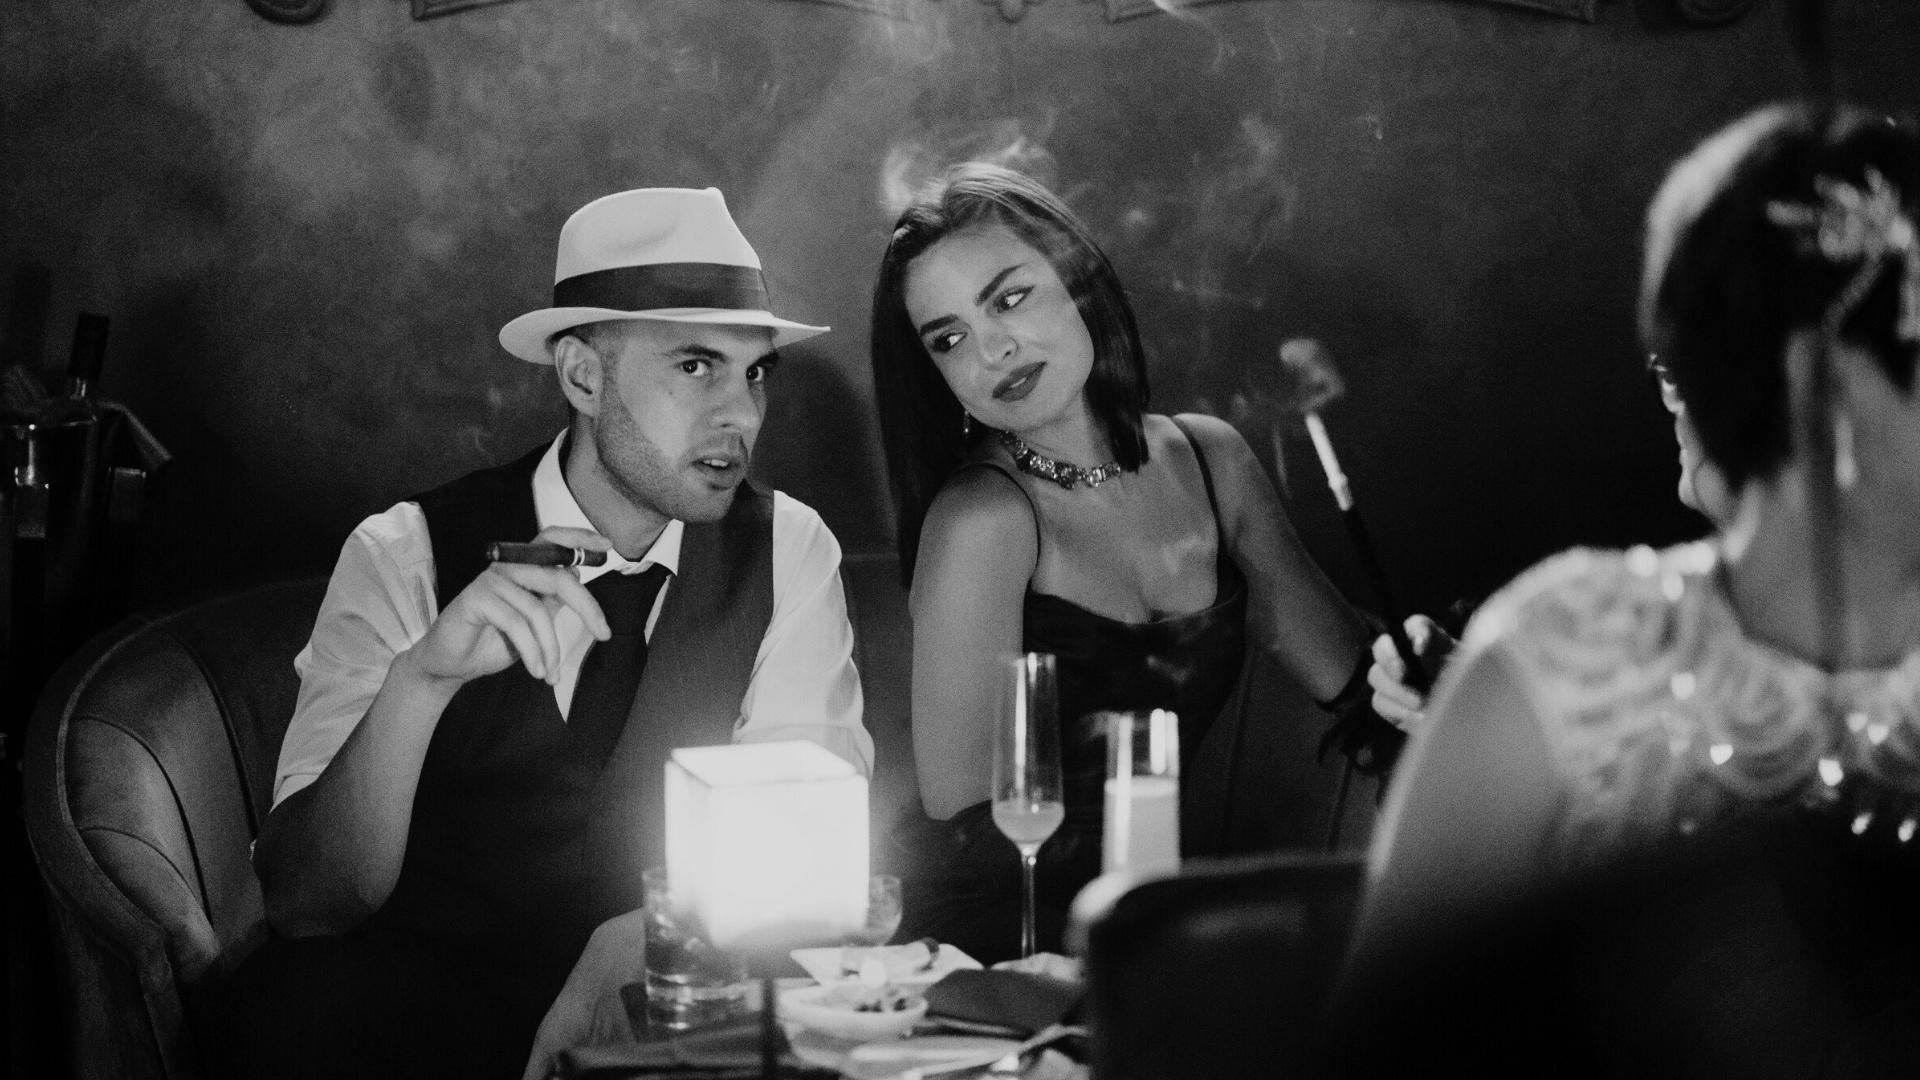 Femme Fatale: Delving into the Noir World of Cinema with Flashback Speakeasy